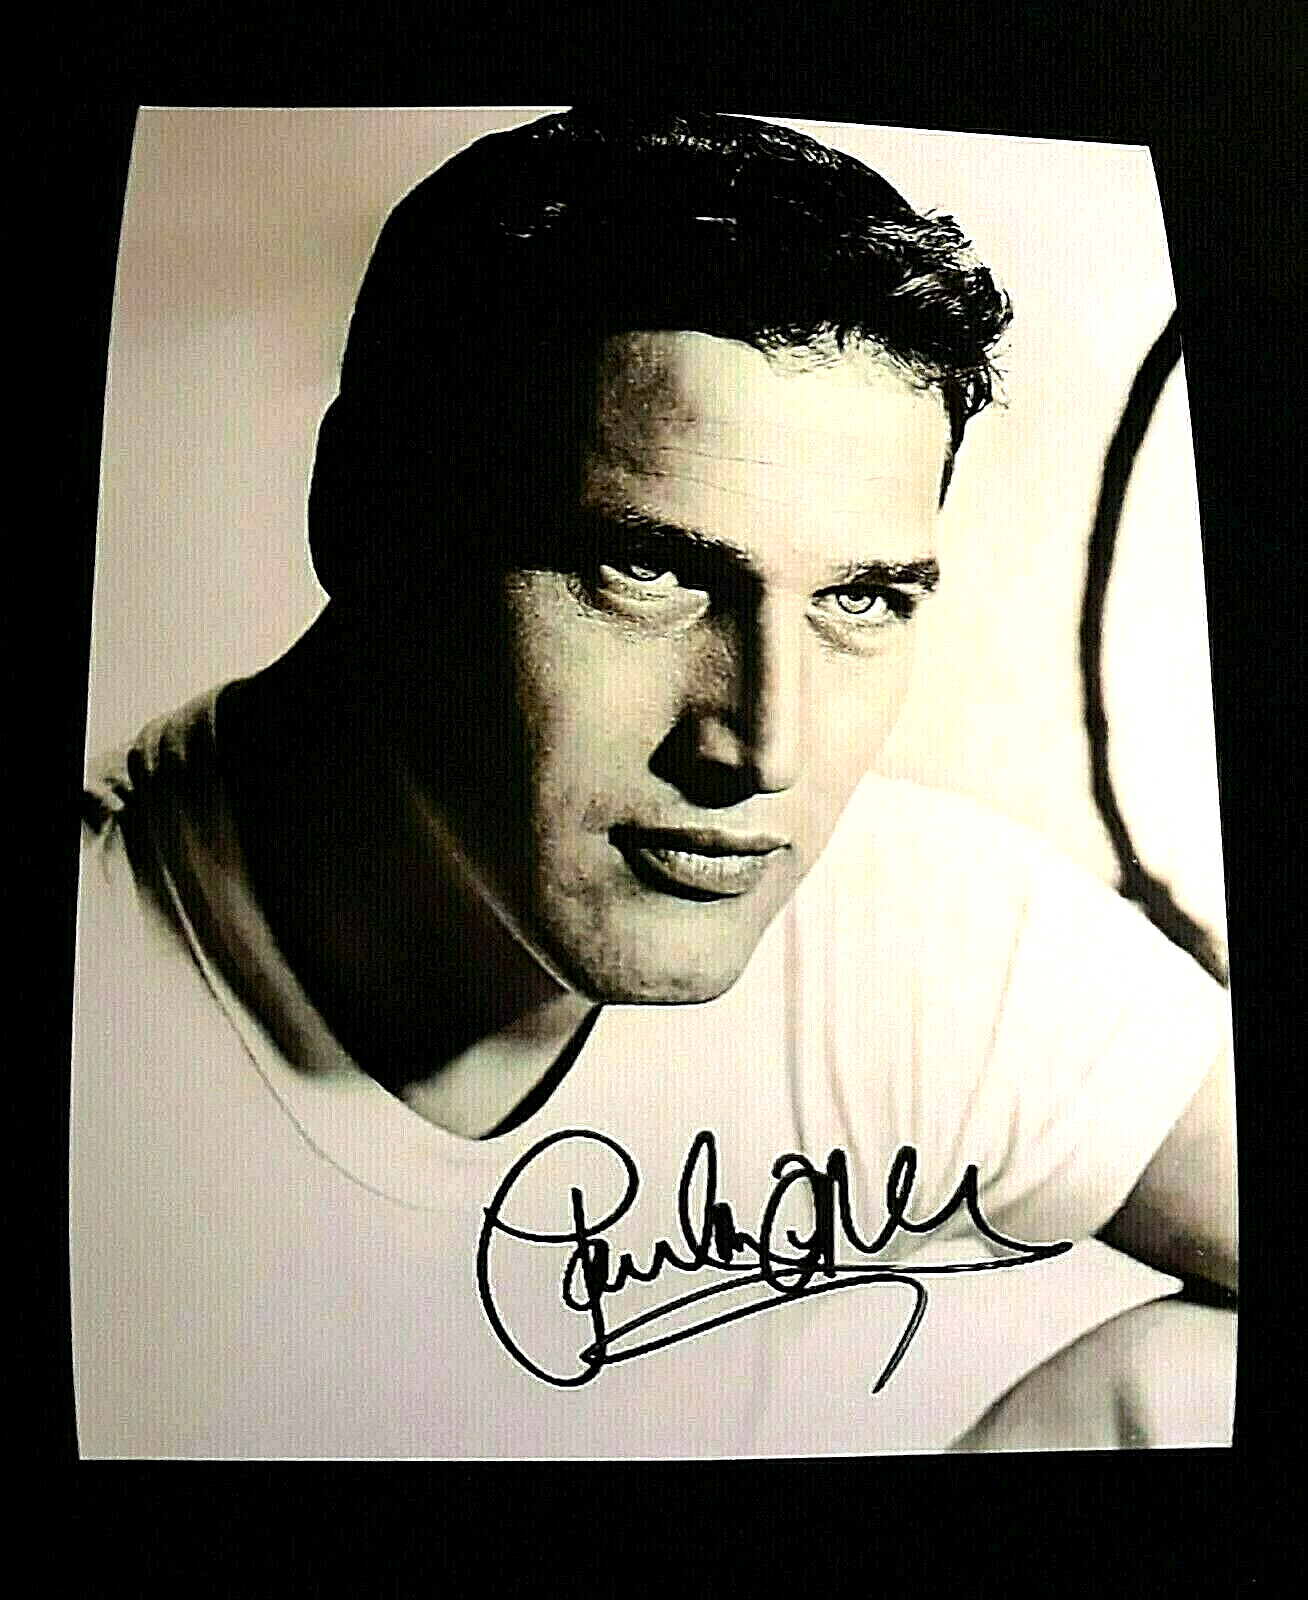 NEWMAN PHOTO Signed 8 x 10 Black White Autographed